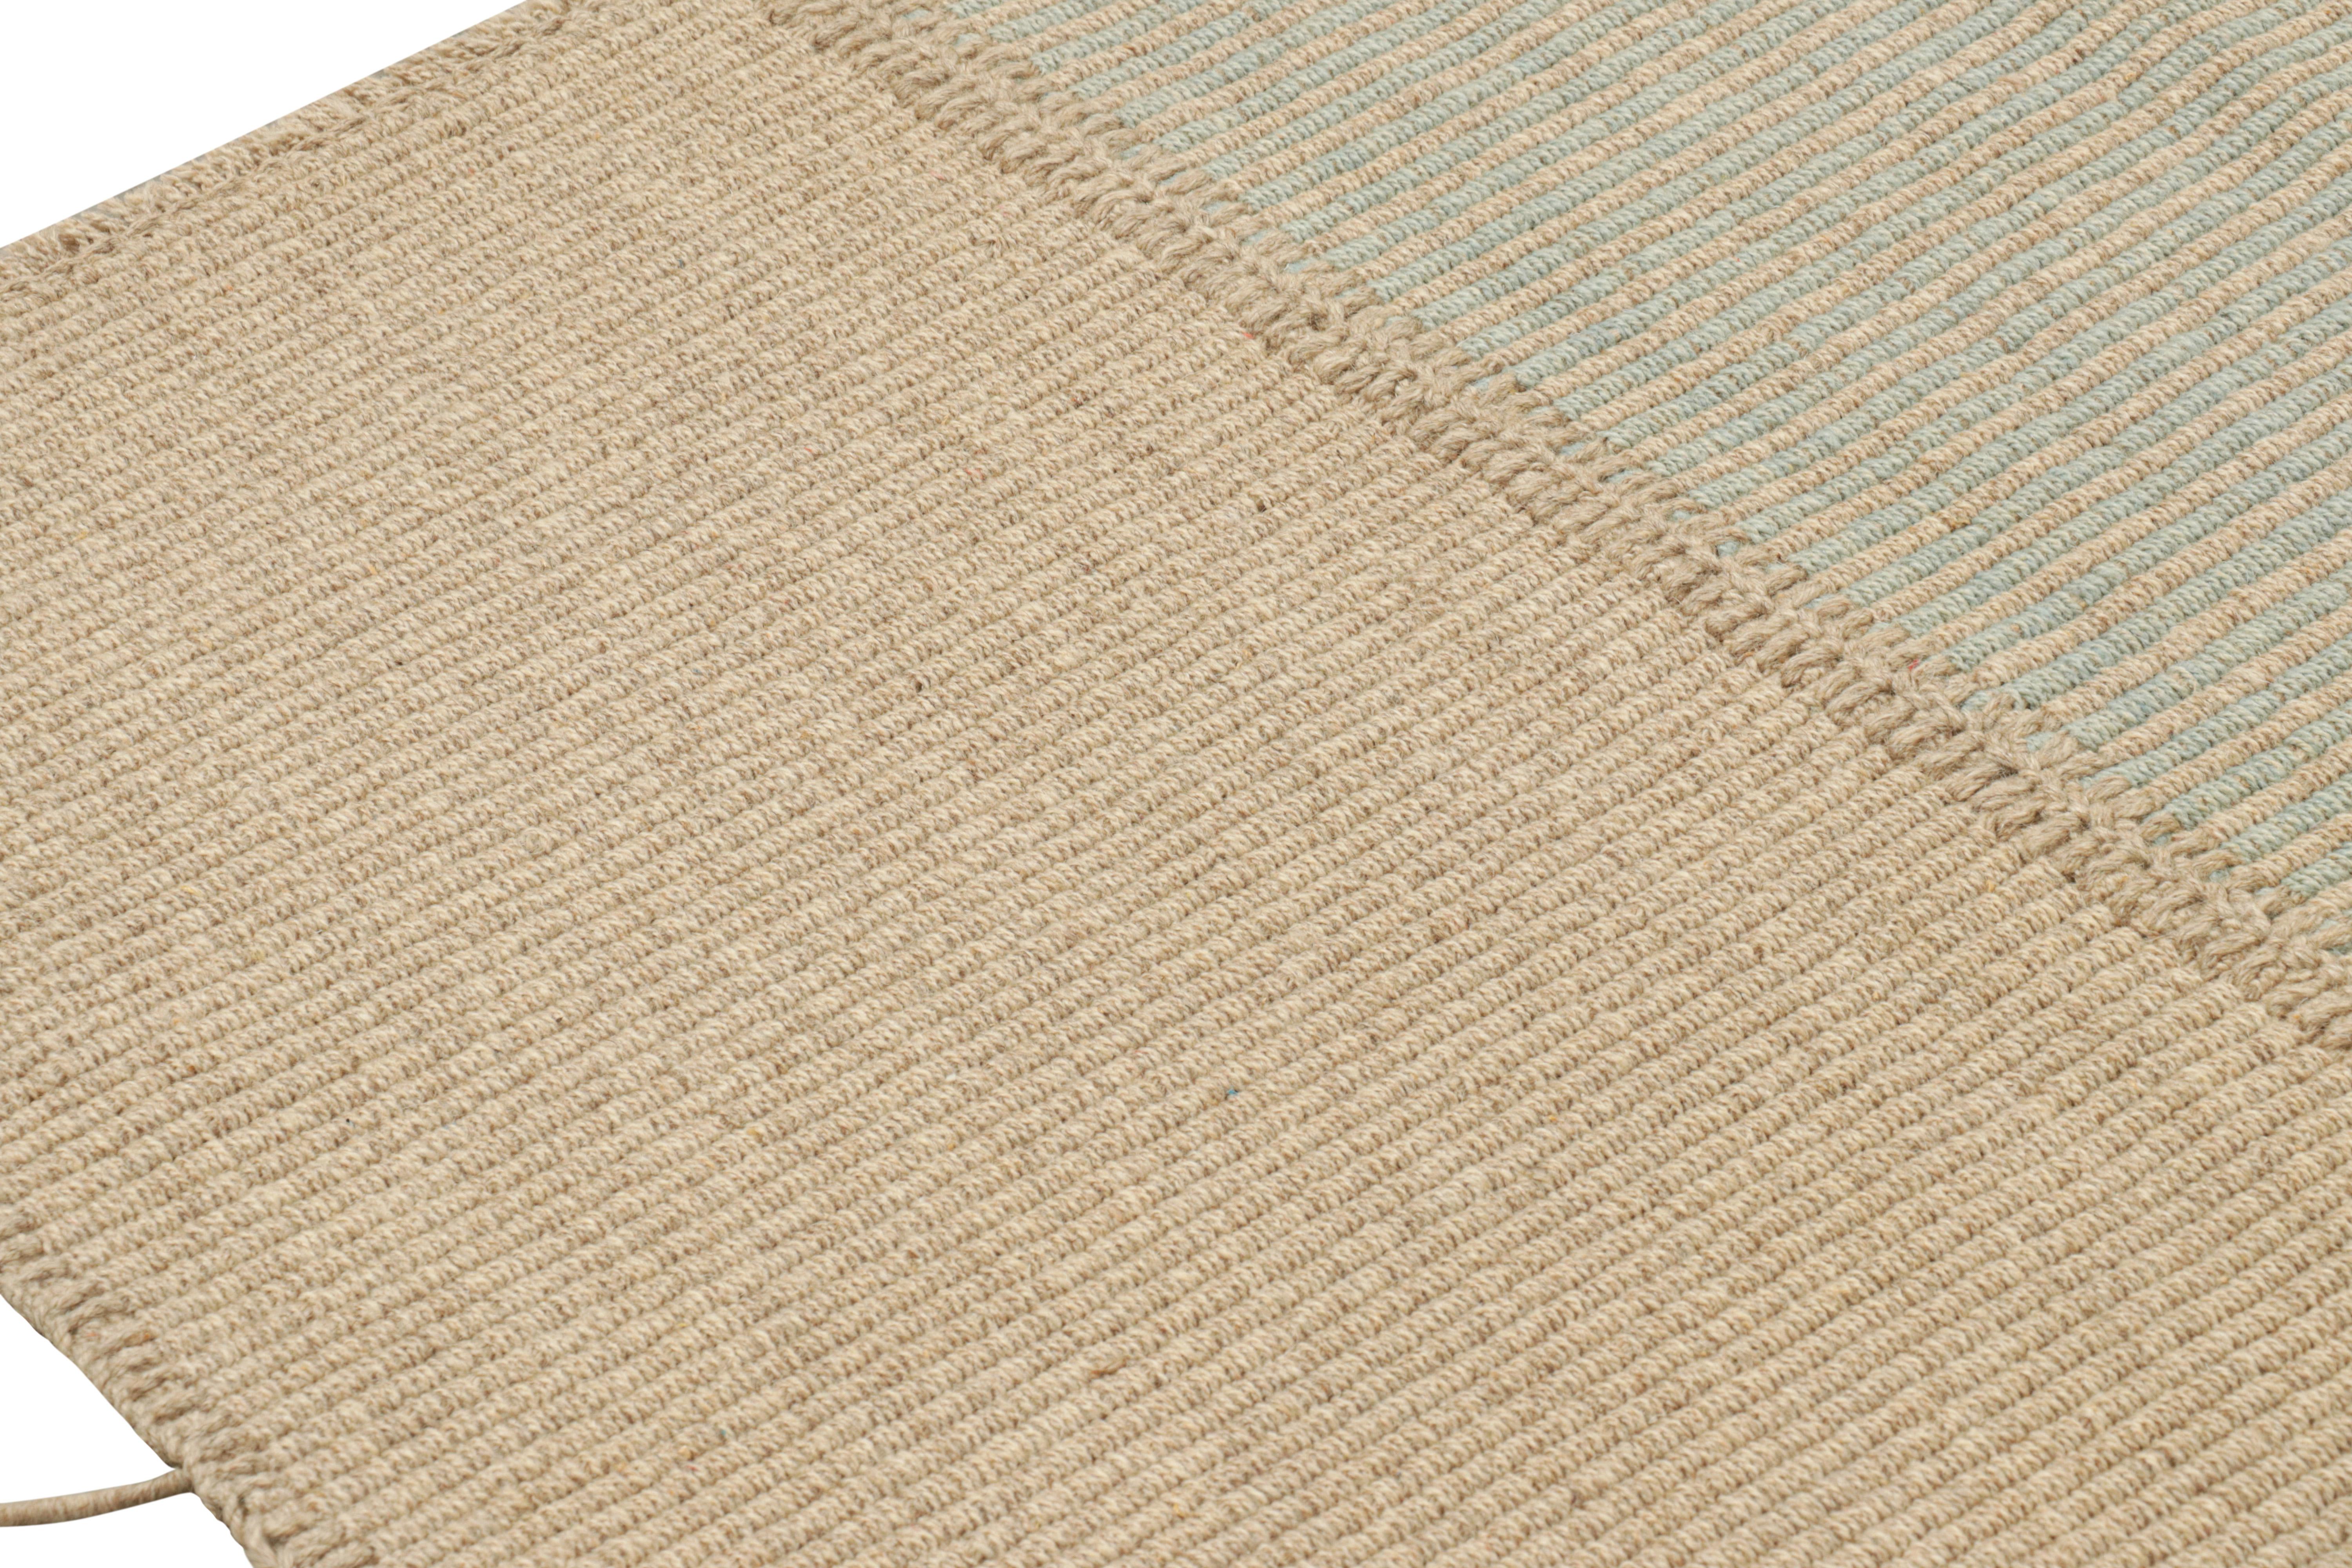 Rug & Kilim’s Contemporary Kilim in Blue and Beige Textural Stripes In New Condition For Sale In Long Island City, NY